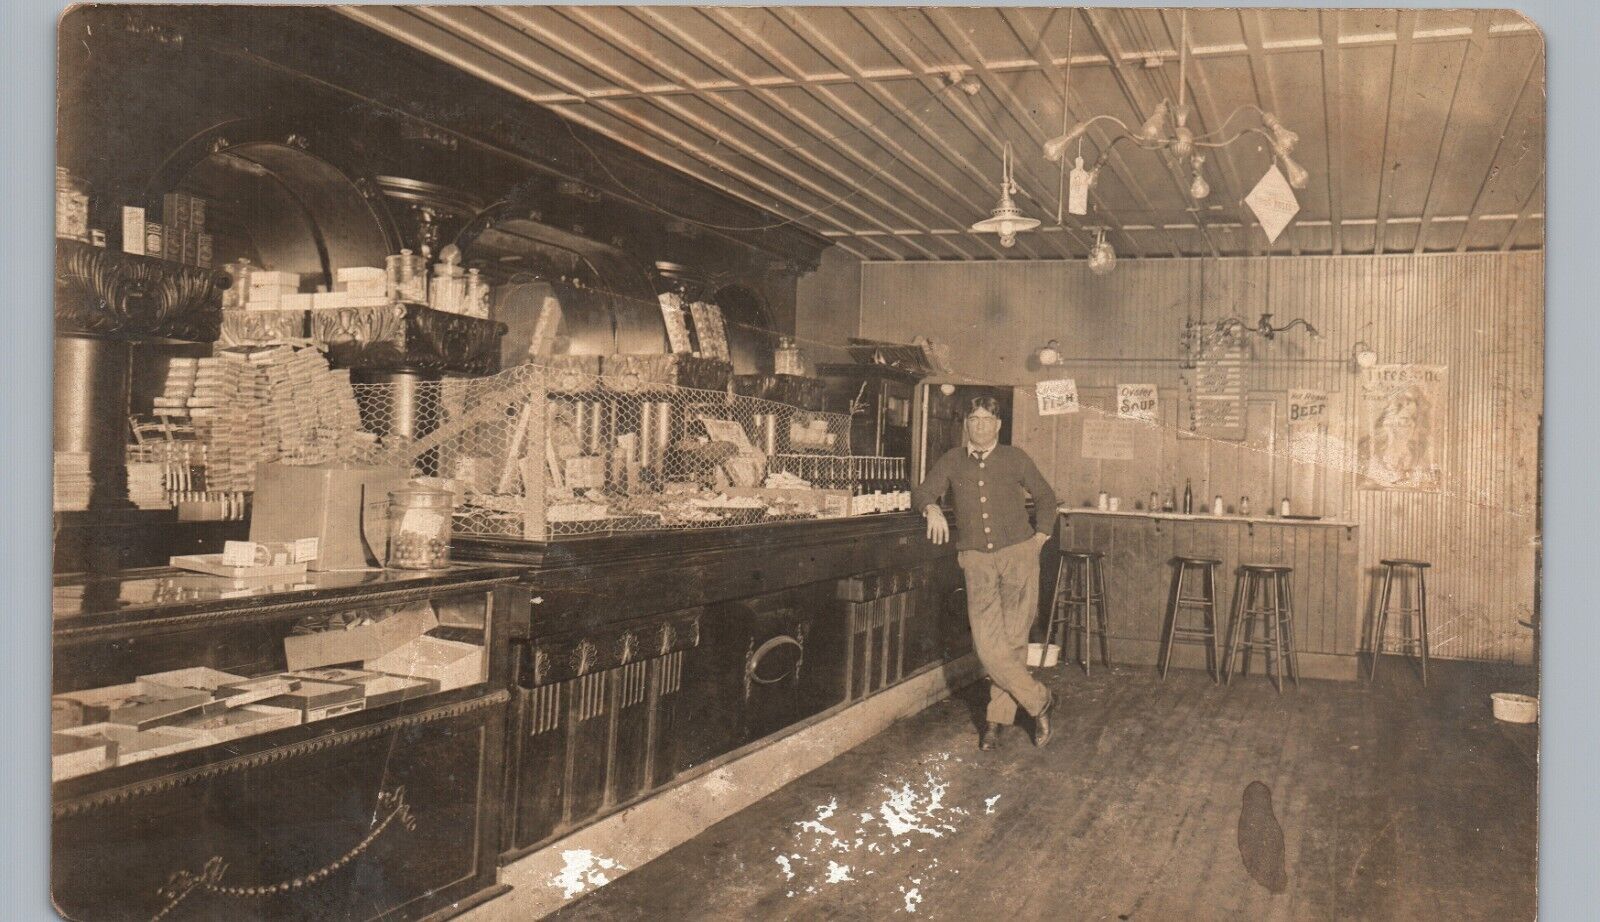 INTERIOR LUNCH ROOM CAFE BAR c1910 real photo postcard rppc oyster soup diner